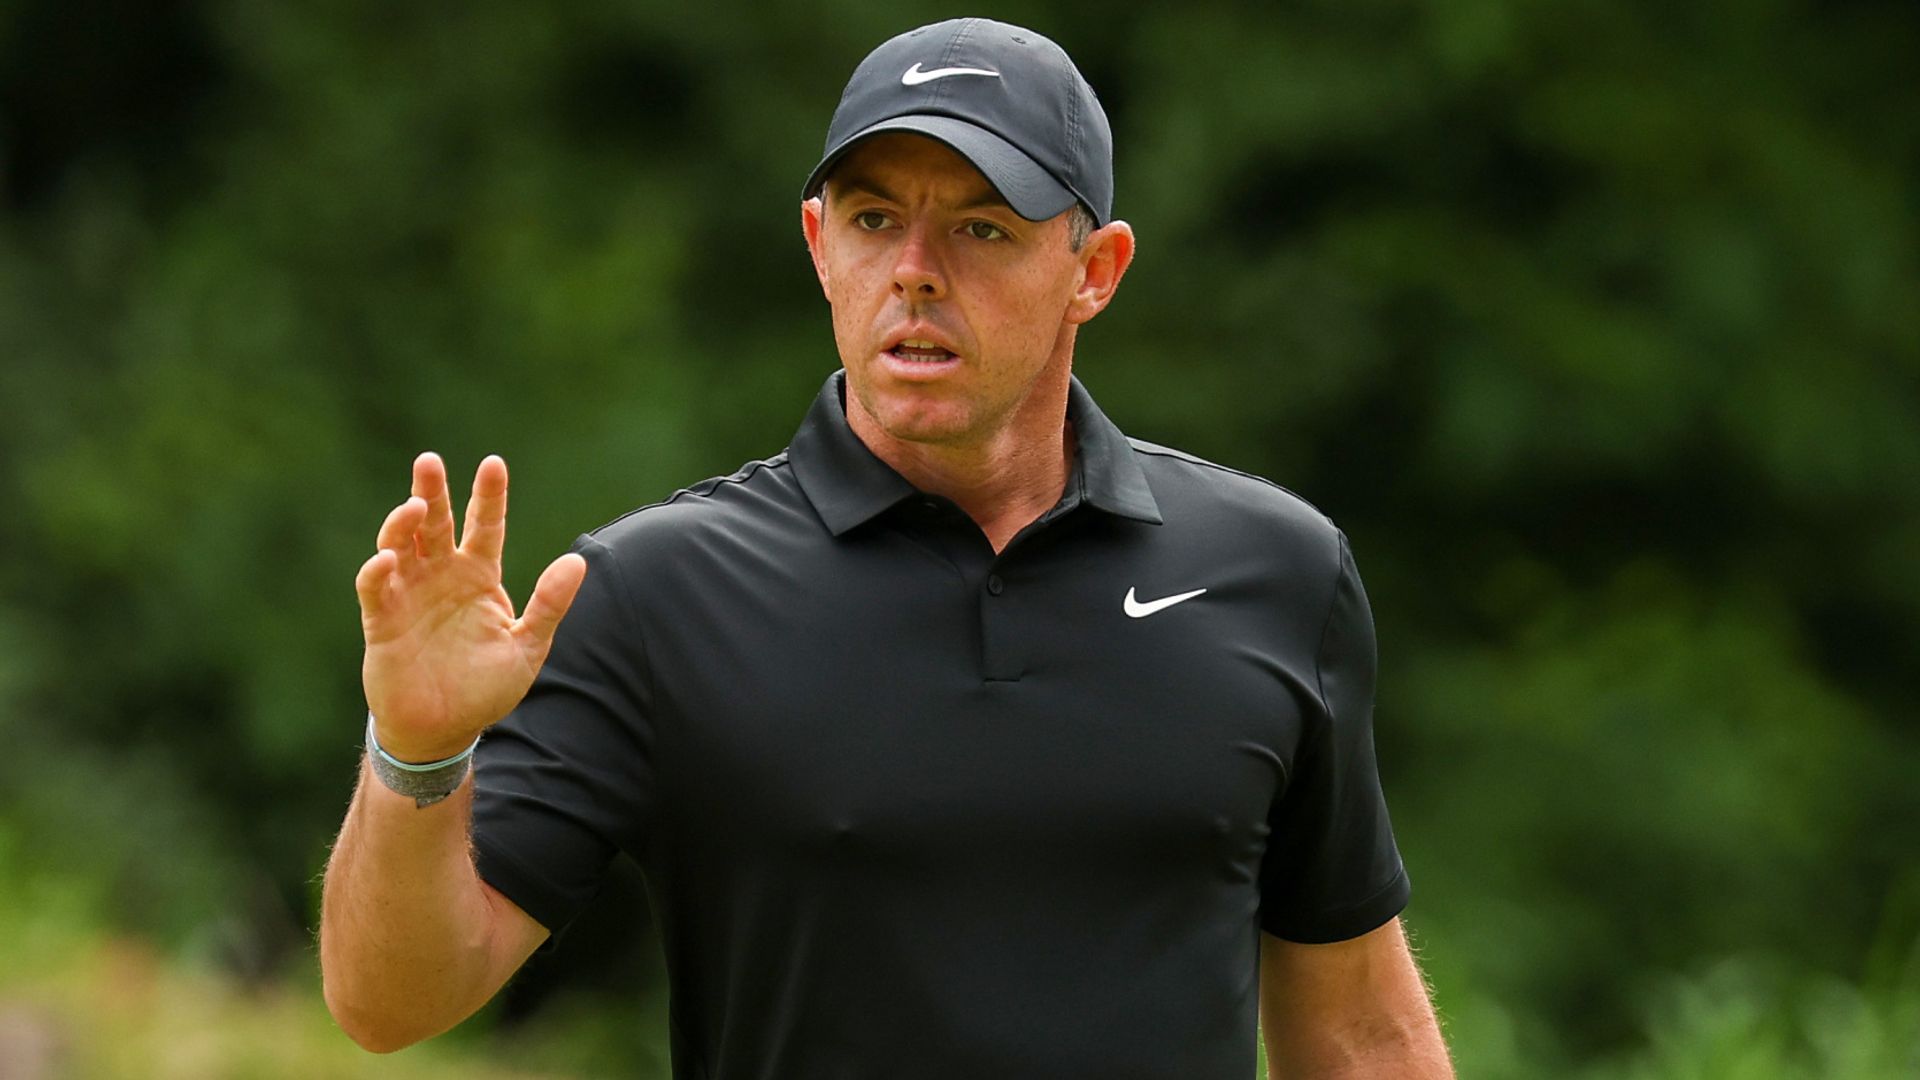 McIlroy moves into Travelers contention as Bradley and McCarthy lead